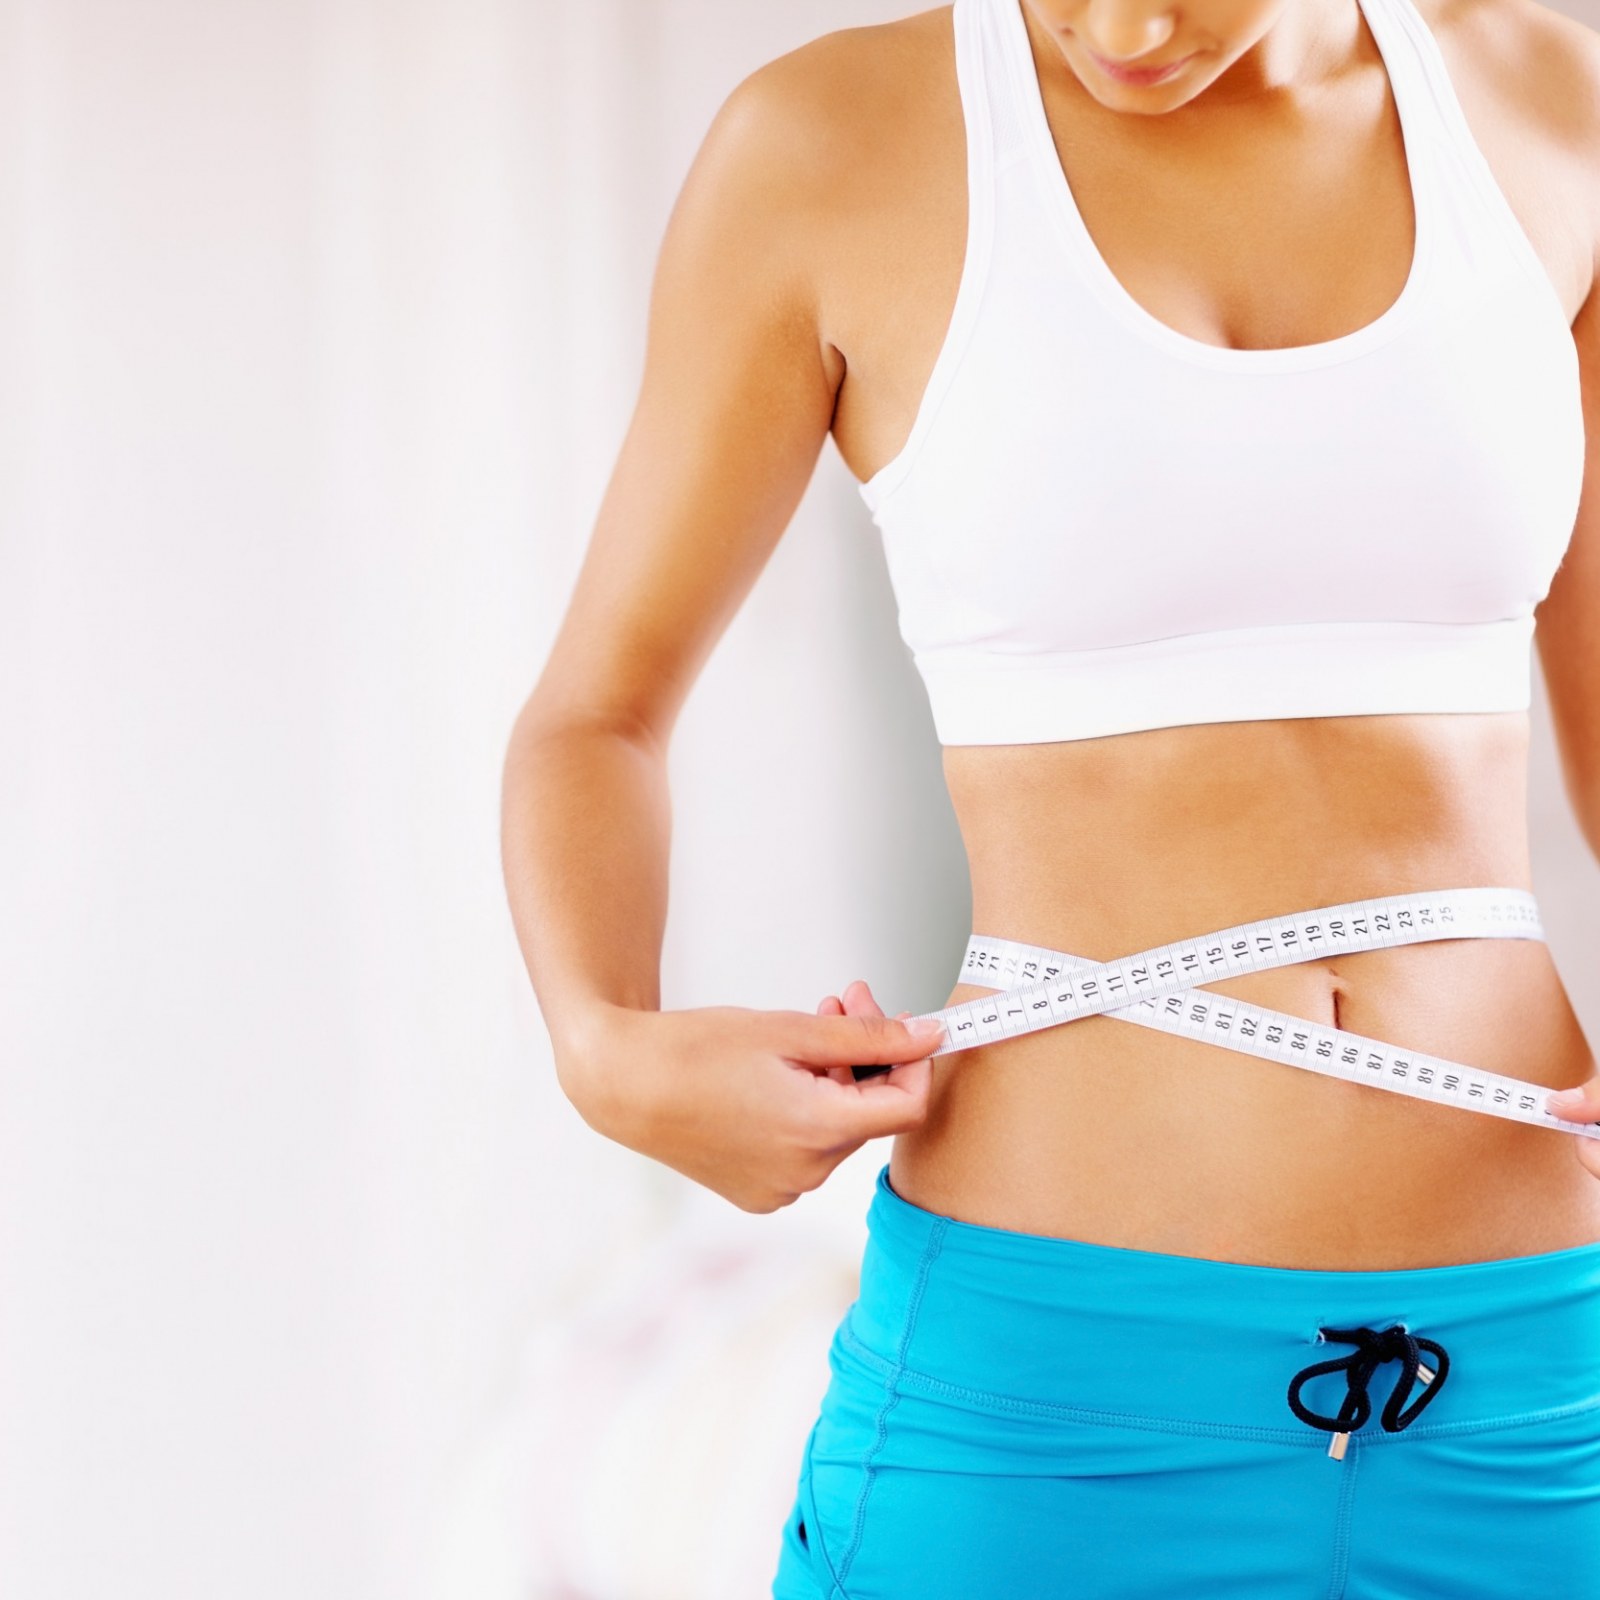 How To Measure Weight Loss Without A Scale